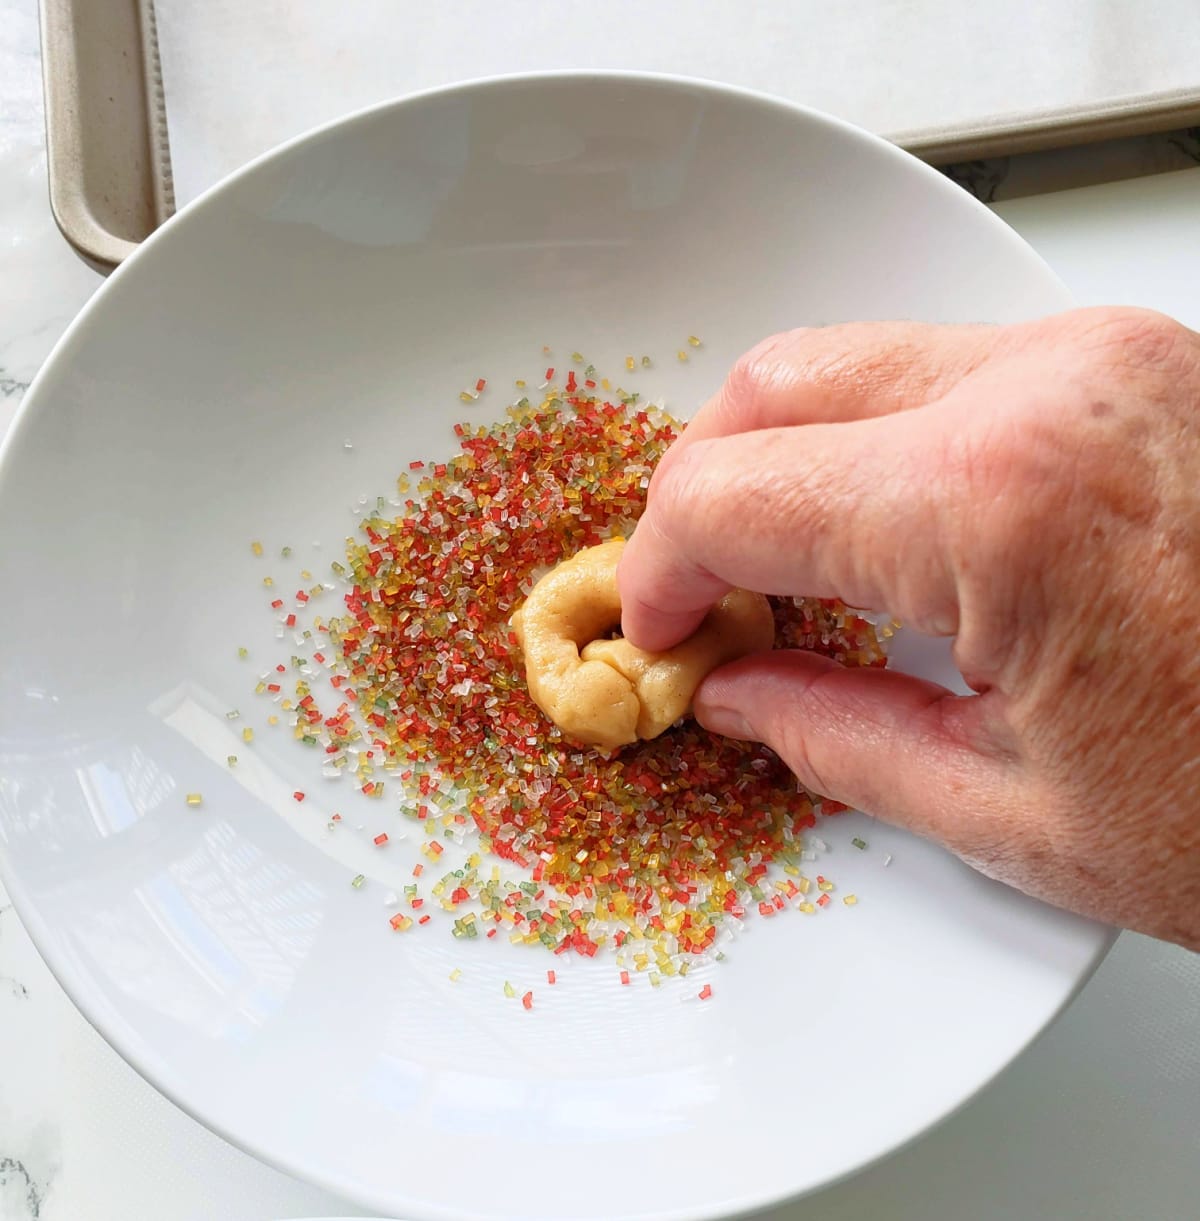 Hand holds a donut-shaped cookie that is dipped into colored sugar crystals in a white bowl